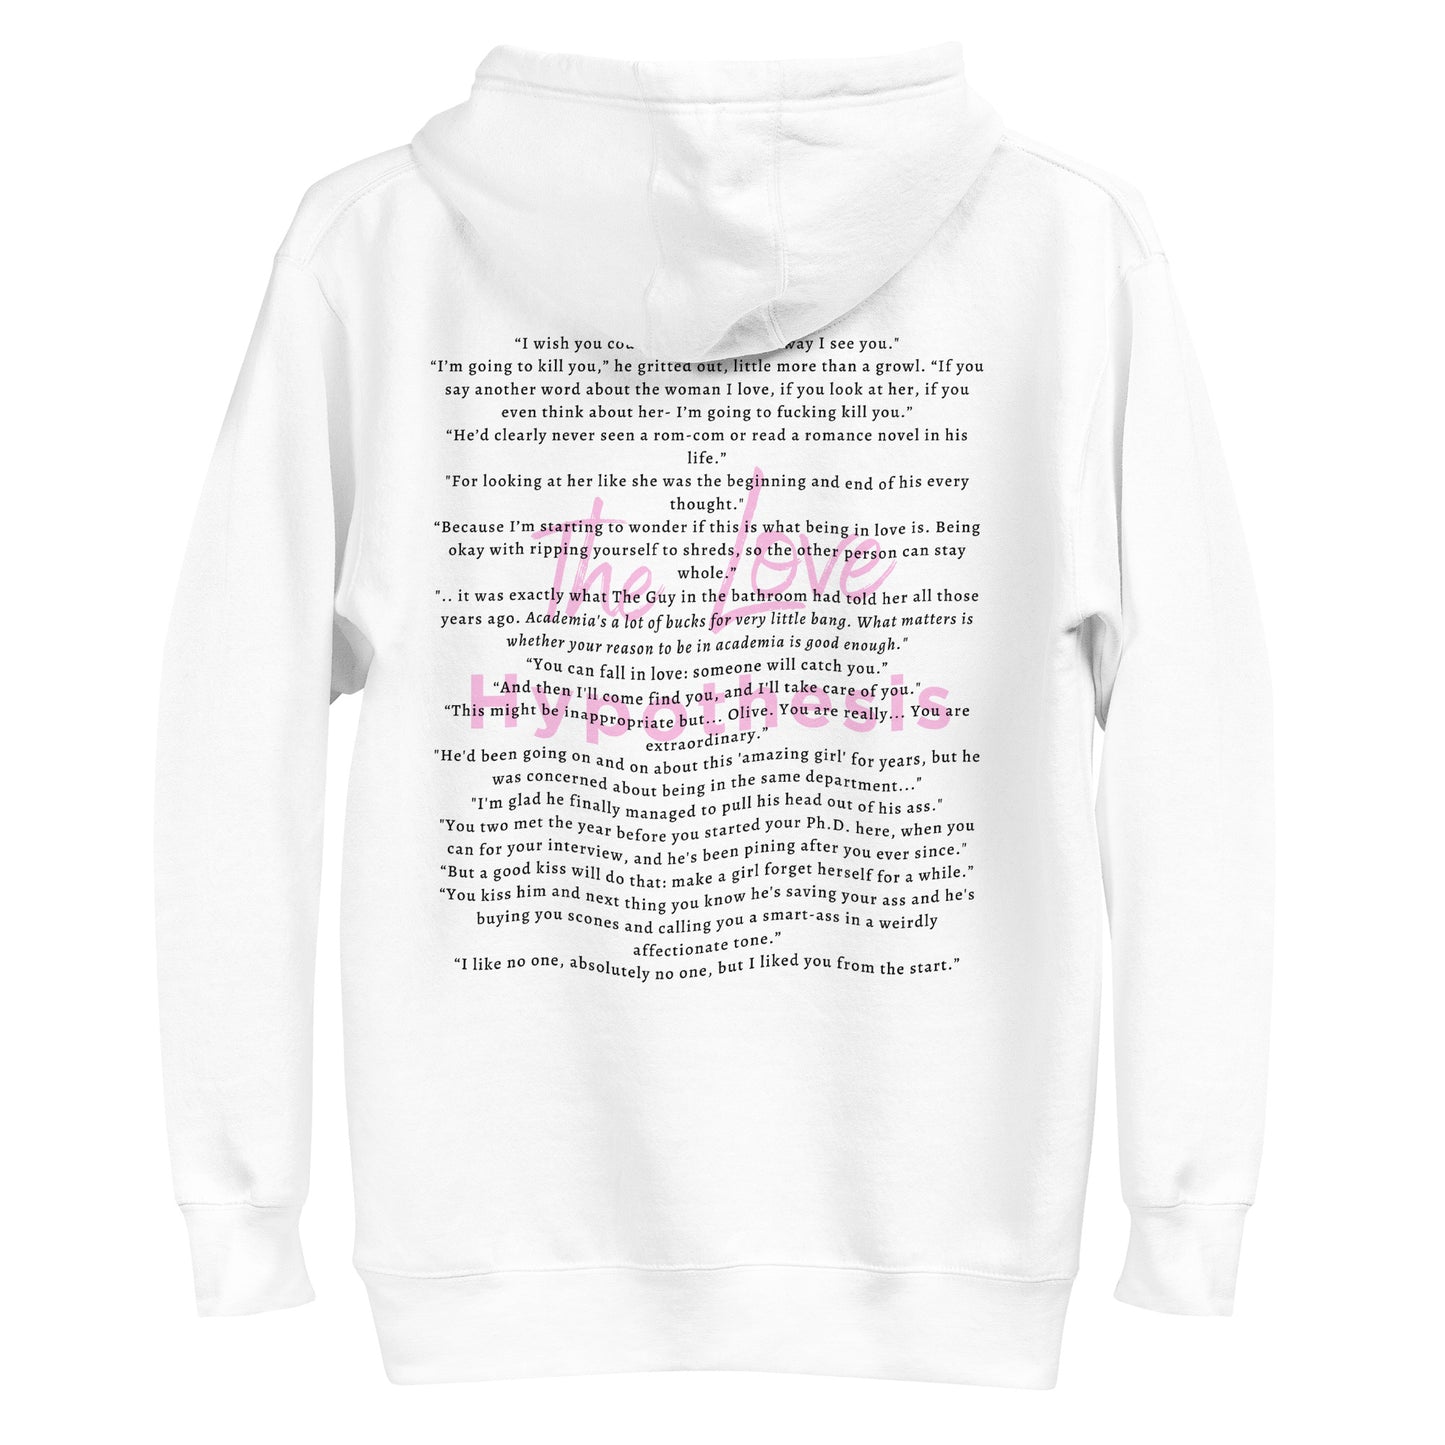 The Love Hypothesis Hoodie